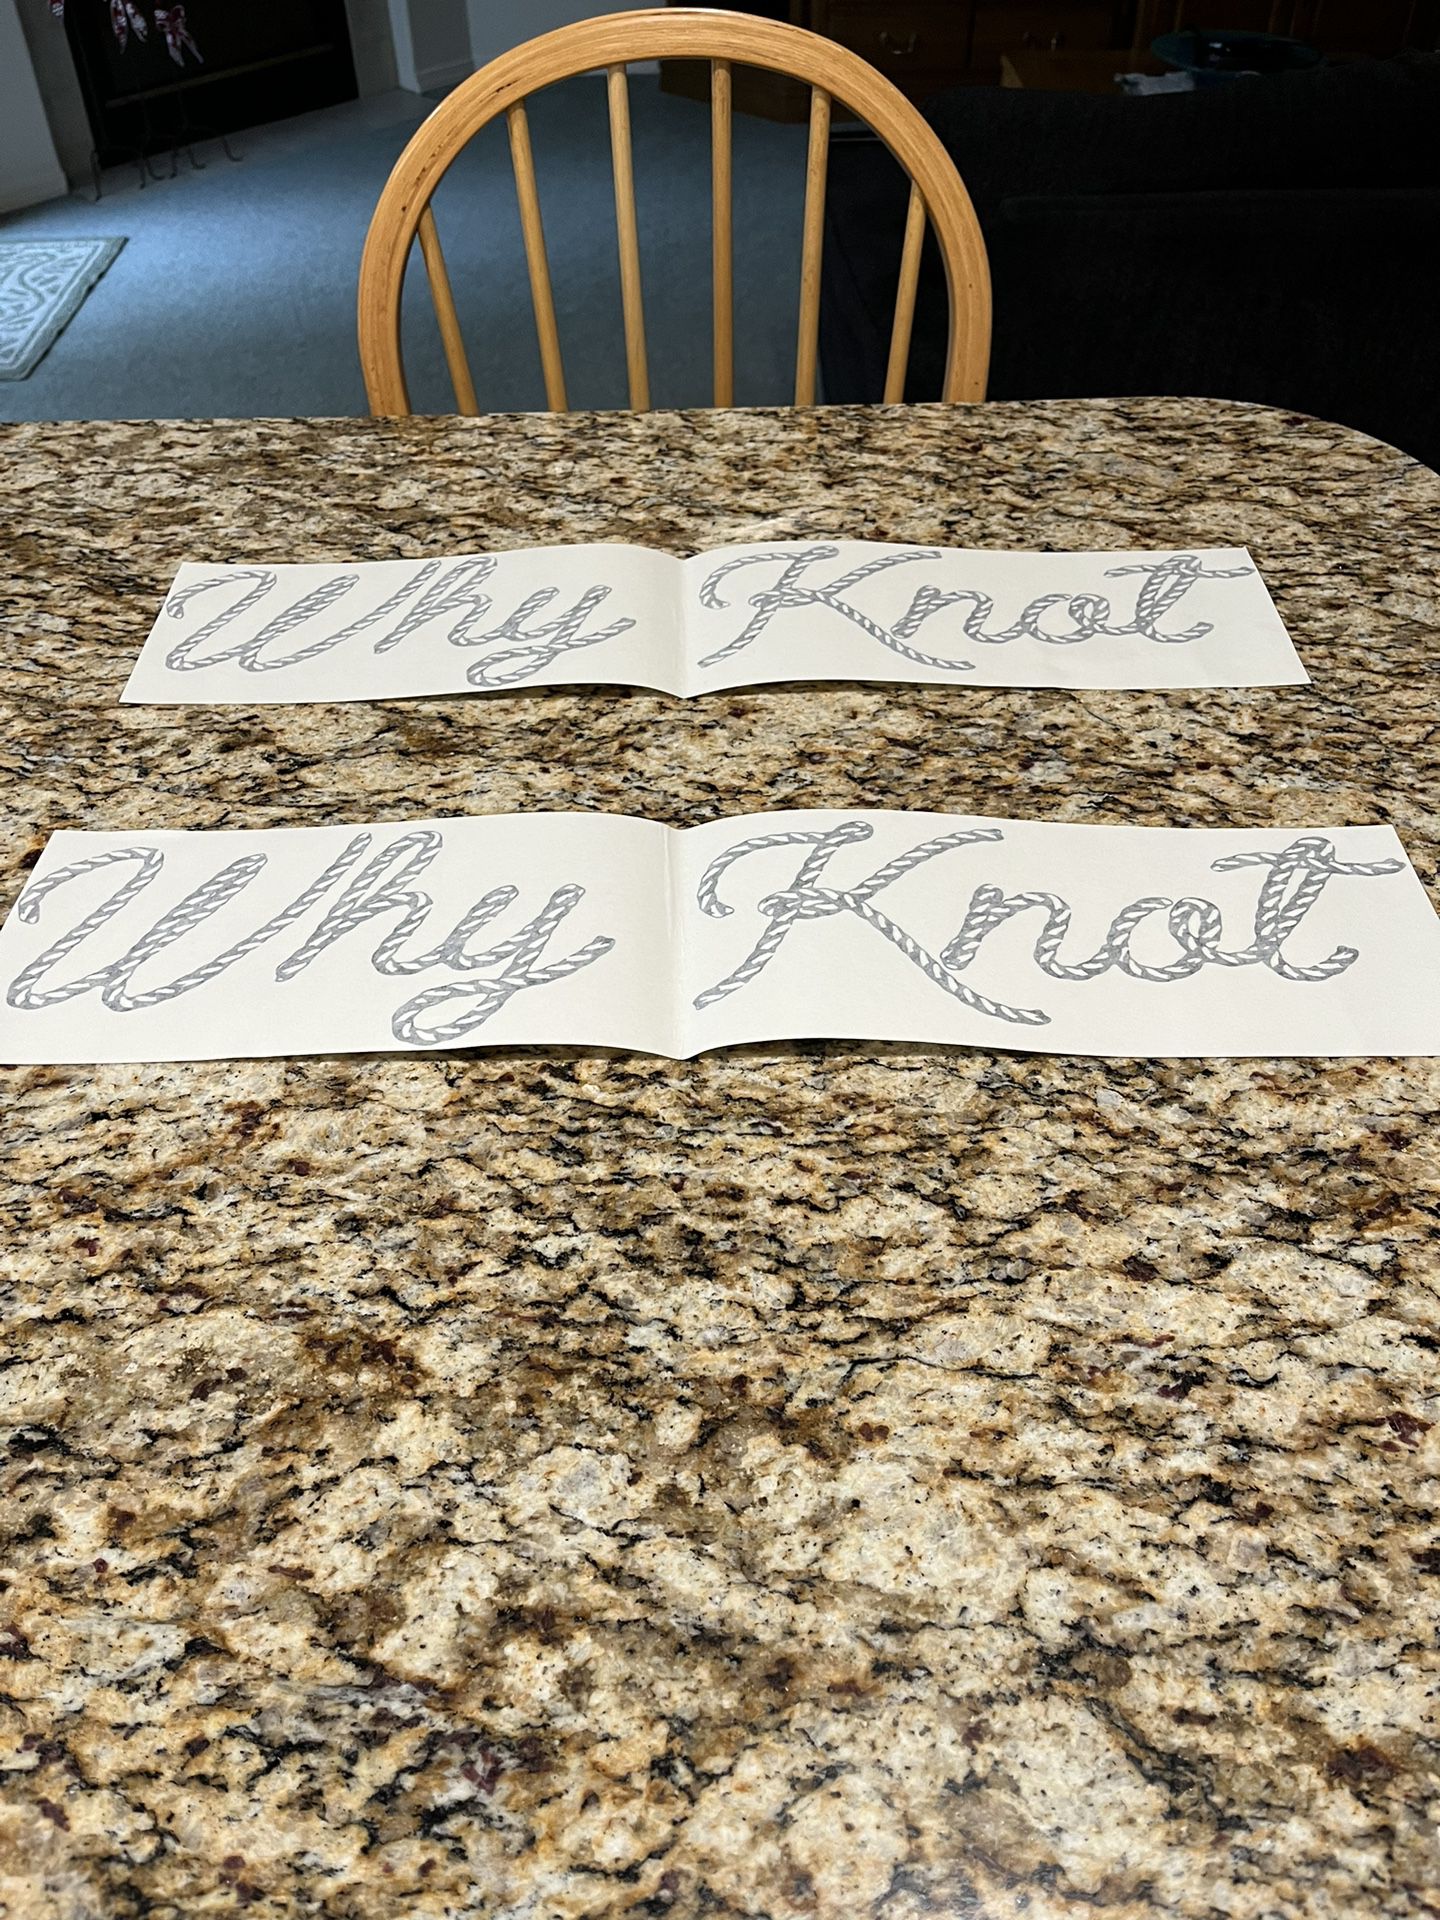 Boat Name Decals!!! “Why knot”!!!